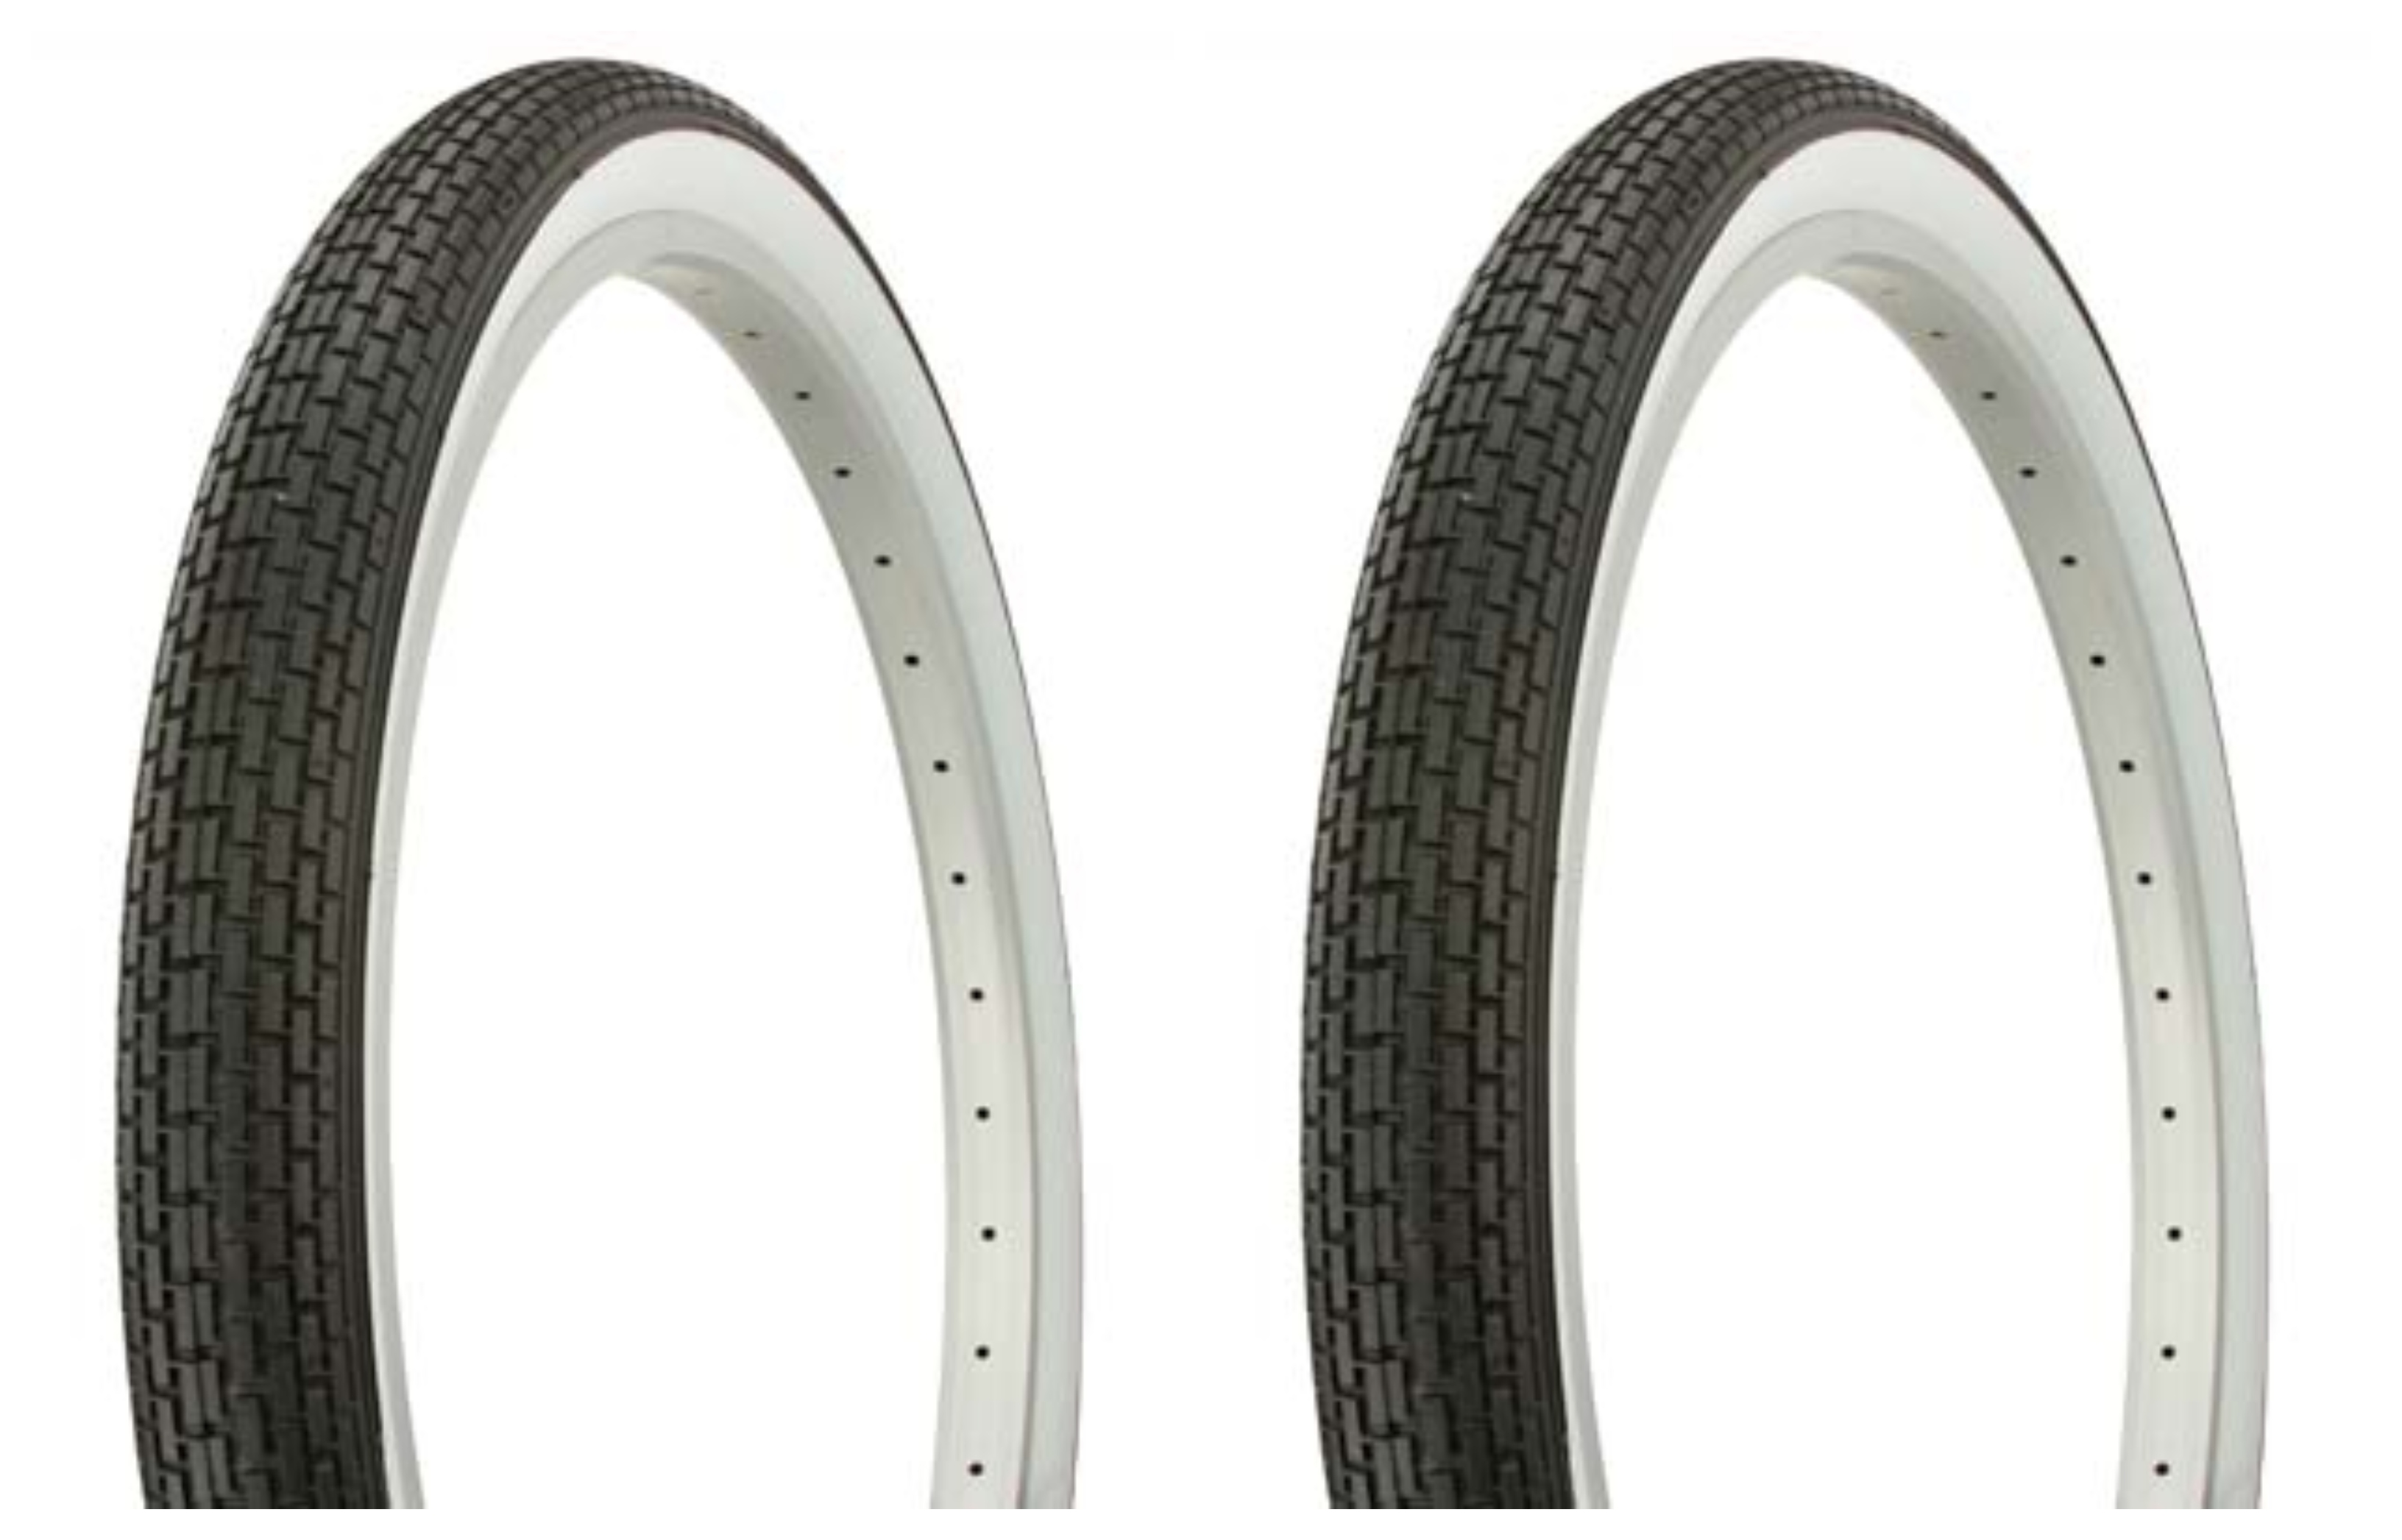 Tire set. 2 Tires. Two Tires Duro 26" x 2.125" Black/White Side Wall HF-120A. Bicycle Tires, bike Tires, beach cruiser bike Tires, cruiser bike Tires - image 1 of 1